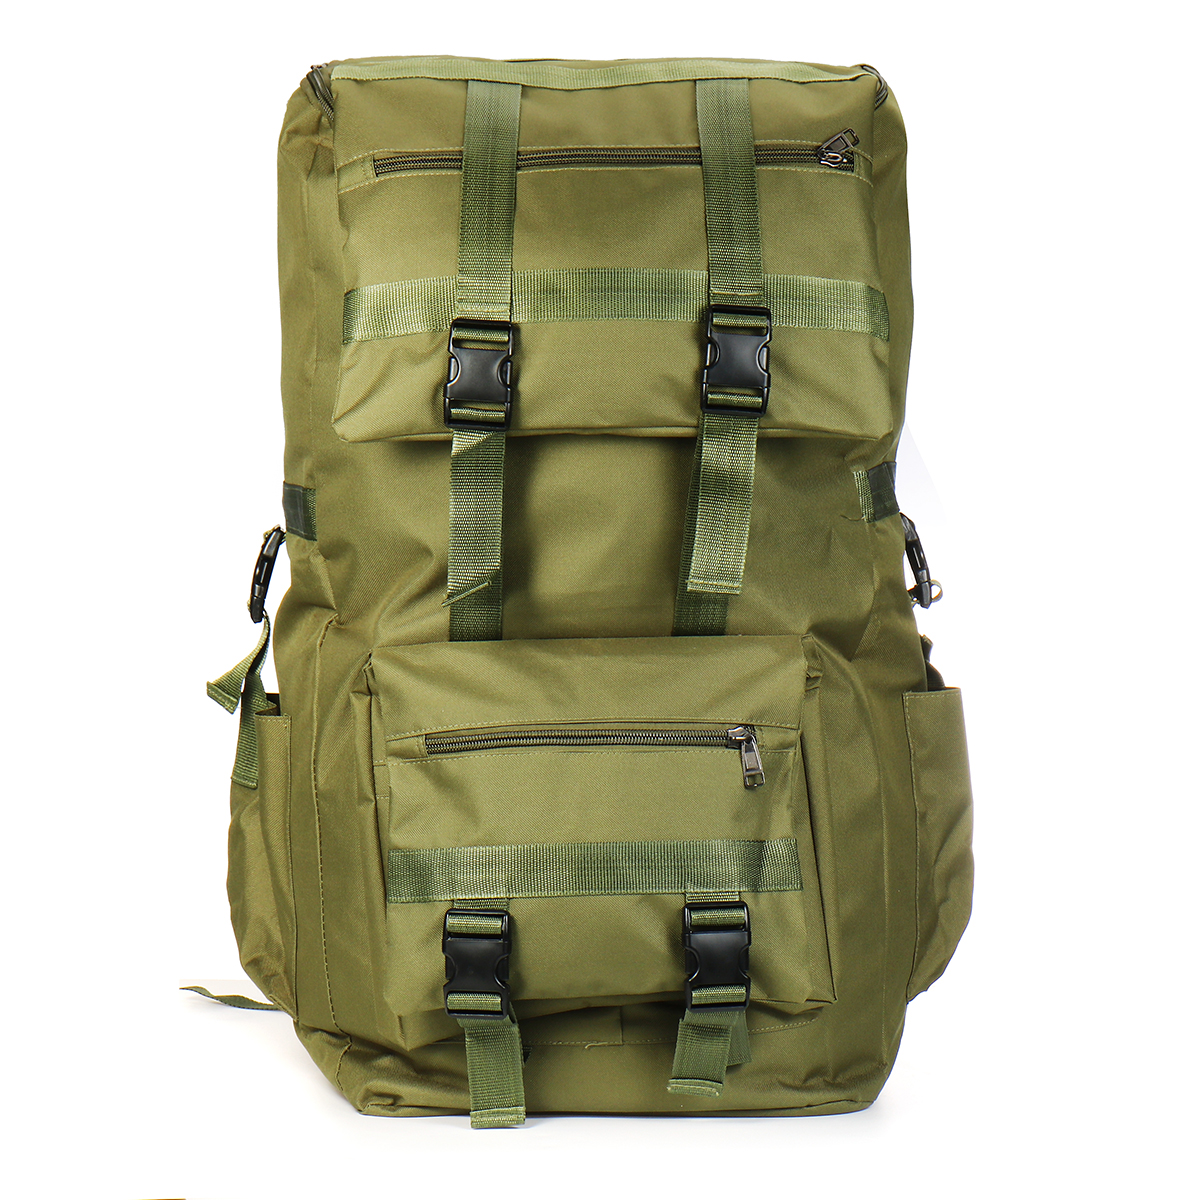 110L Large Capacity Backpack Military Tactical Outdoor Rucksack Camping Hiking Trekking Travel - Auto GoShop